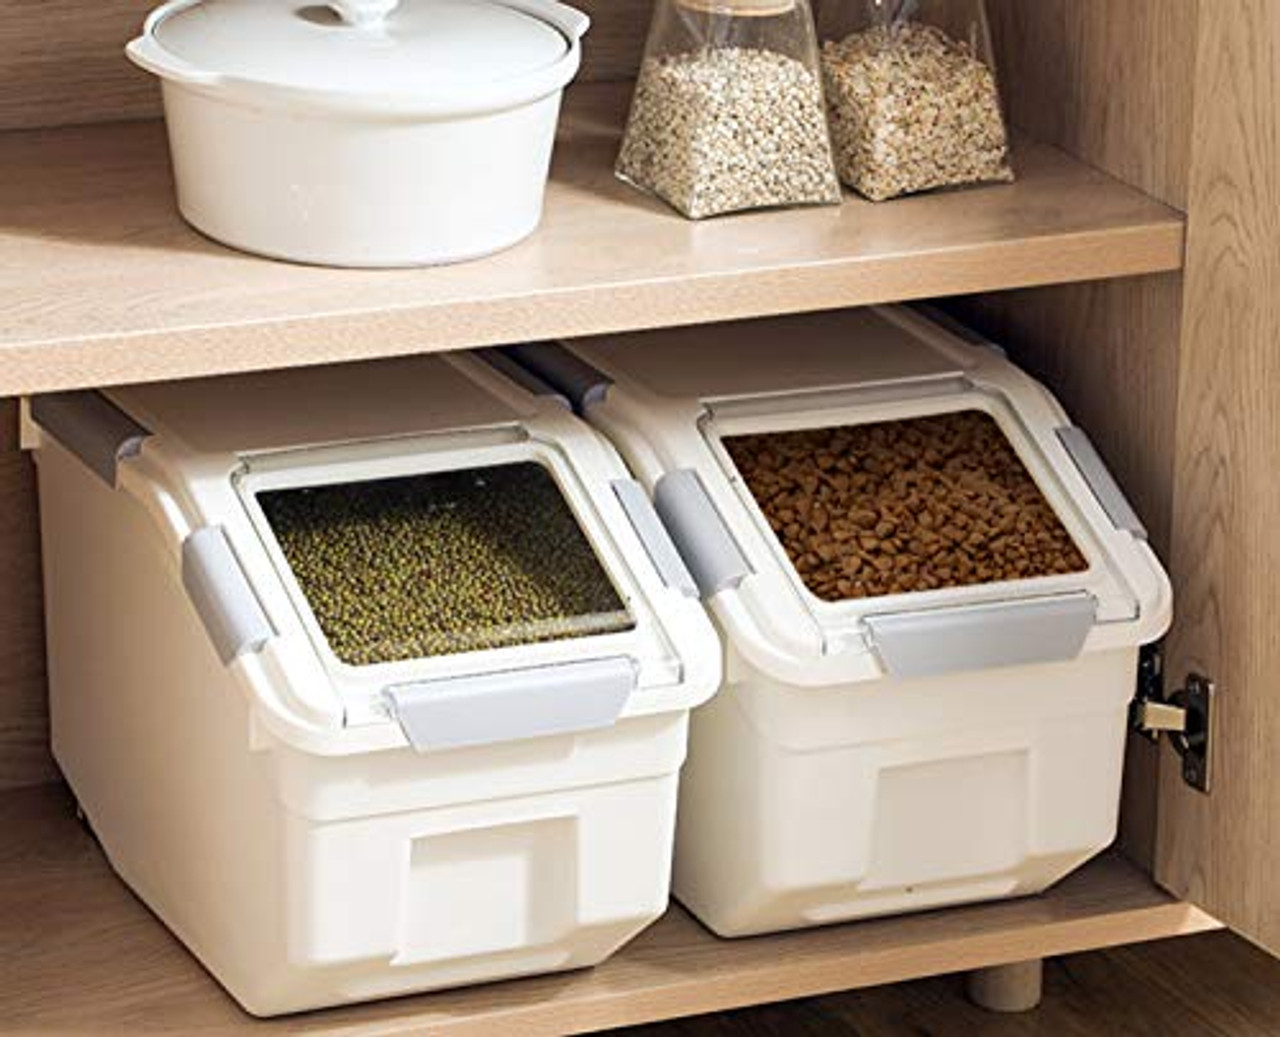 LISM 2 Pack Dog Food Storage Container with Scoop,Large Airtight